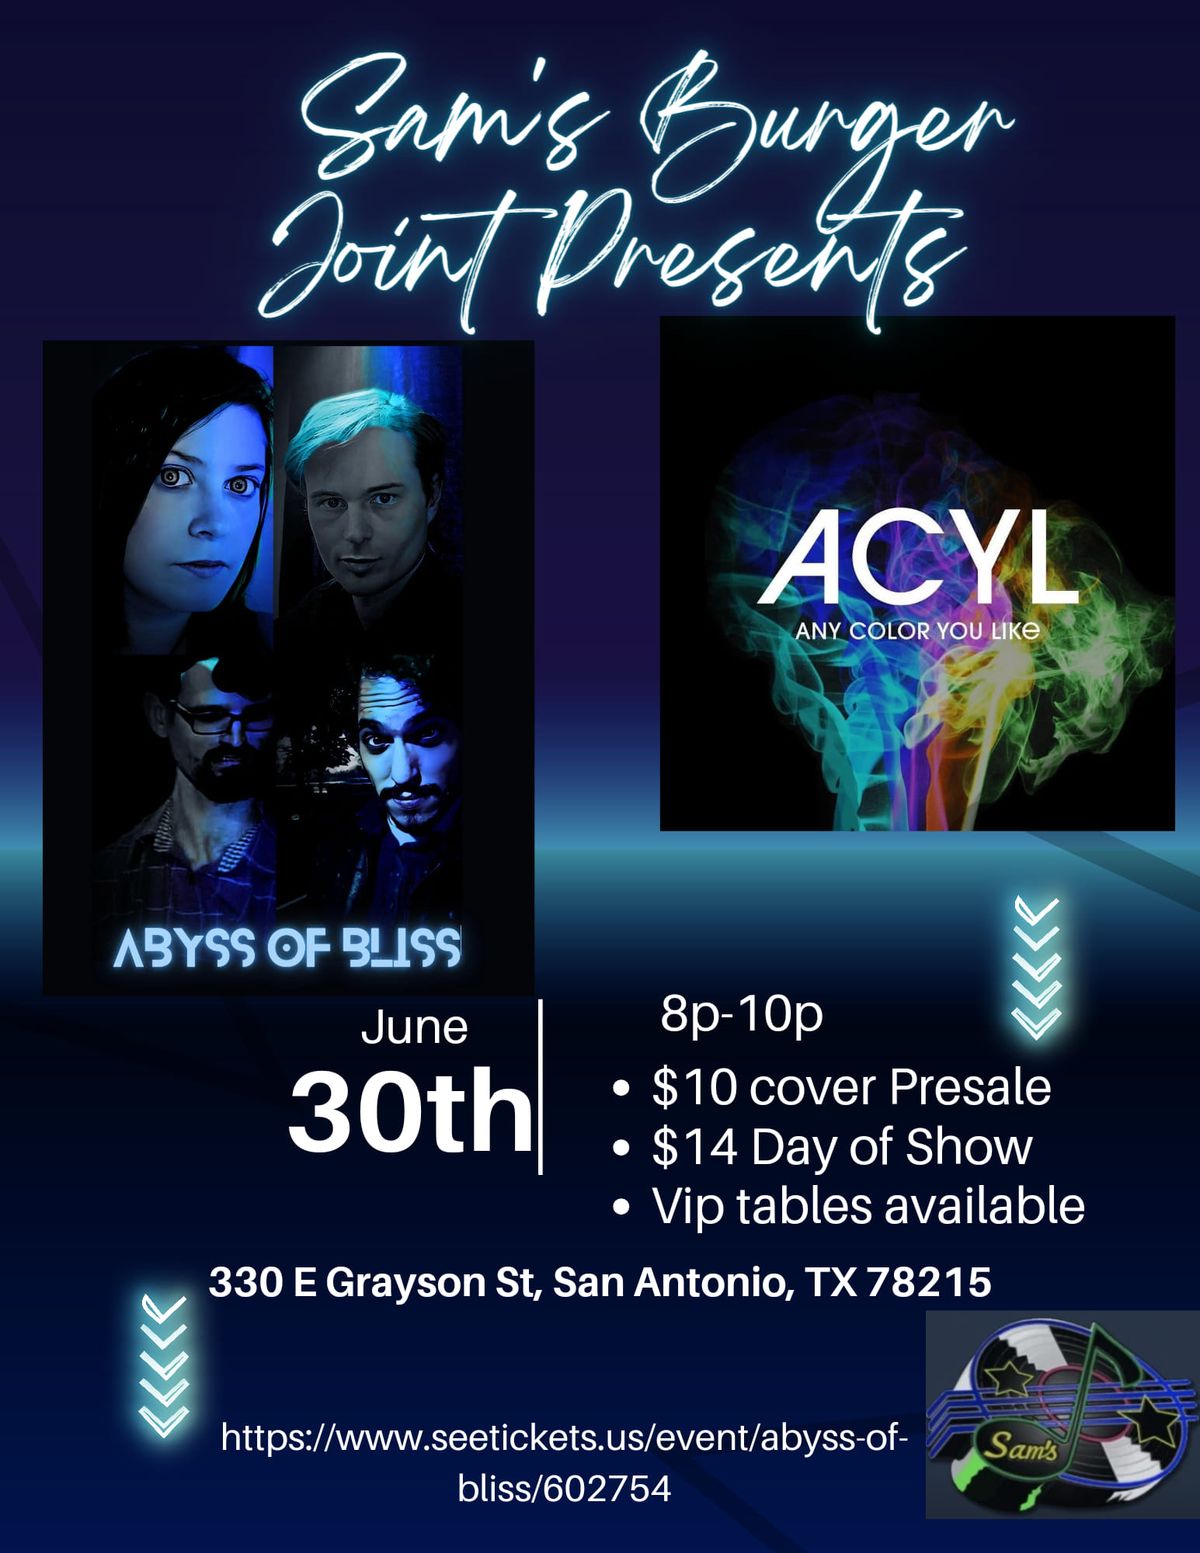 Sam's Burger Joint Presents Abyss Of Bliss and Any Color you Like